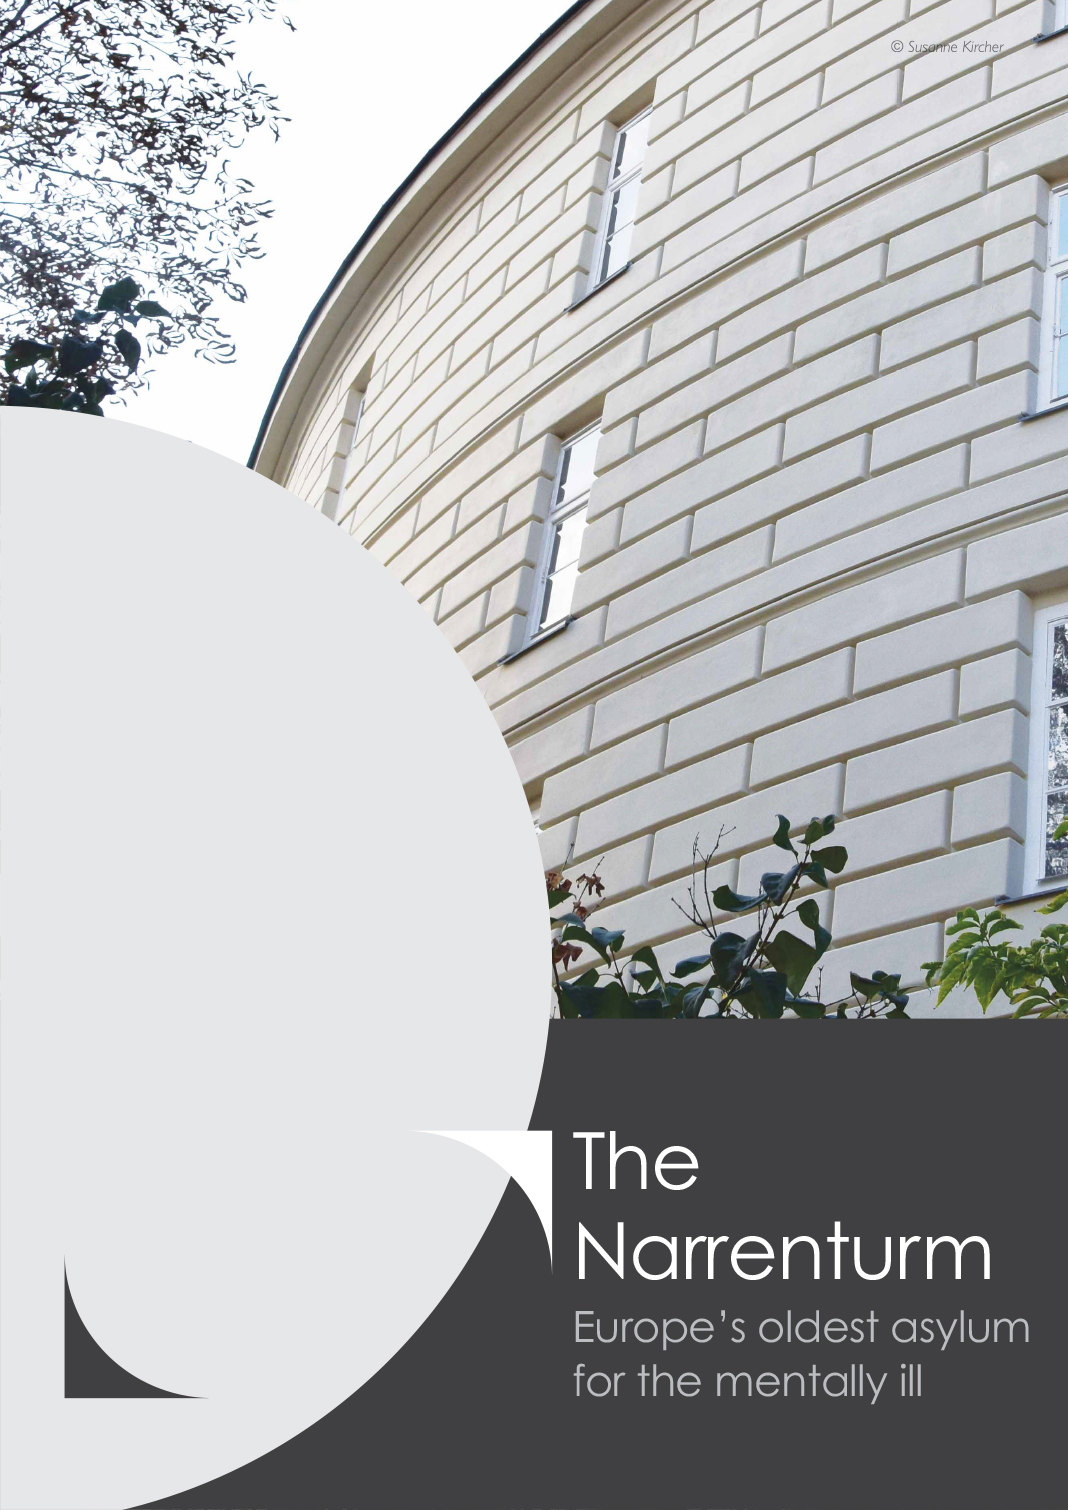 Introducing the Narrenturm: the world’s first hospital for the mentally ill